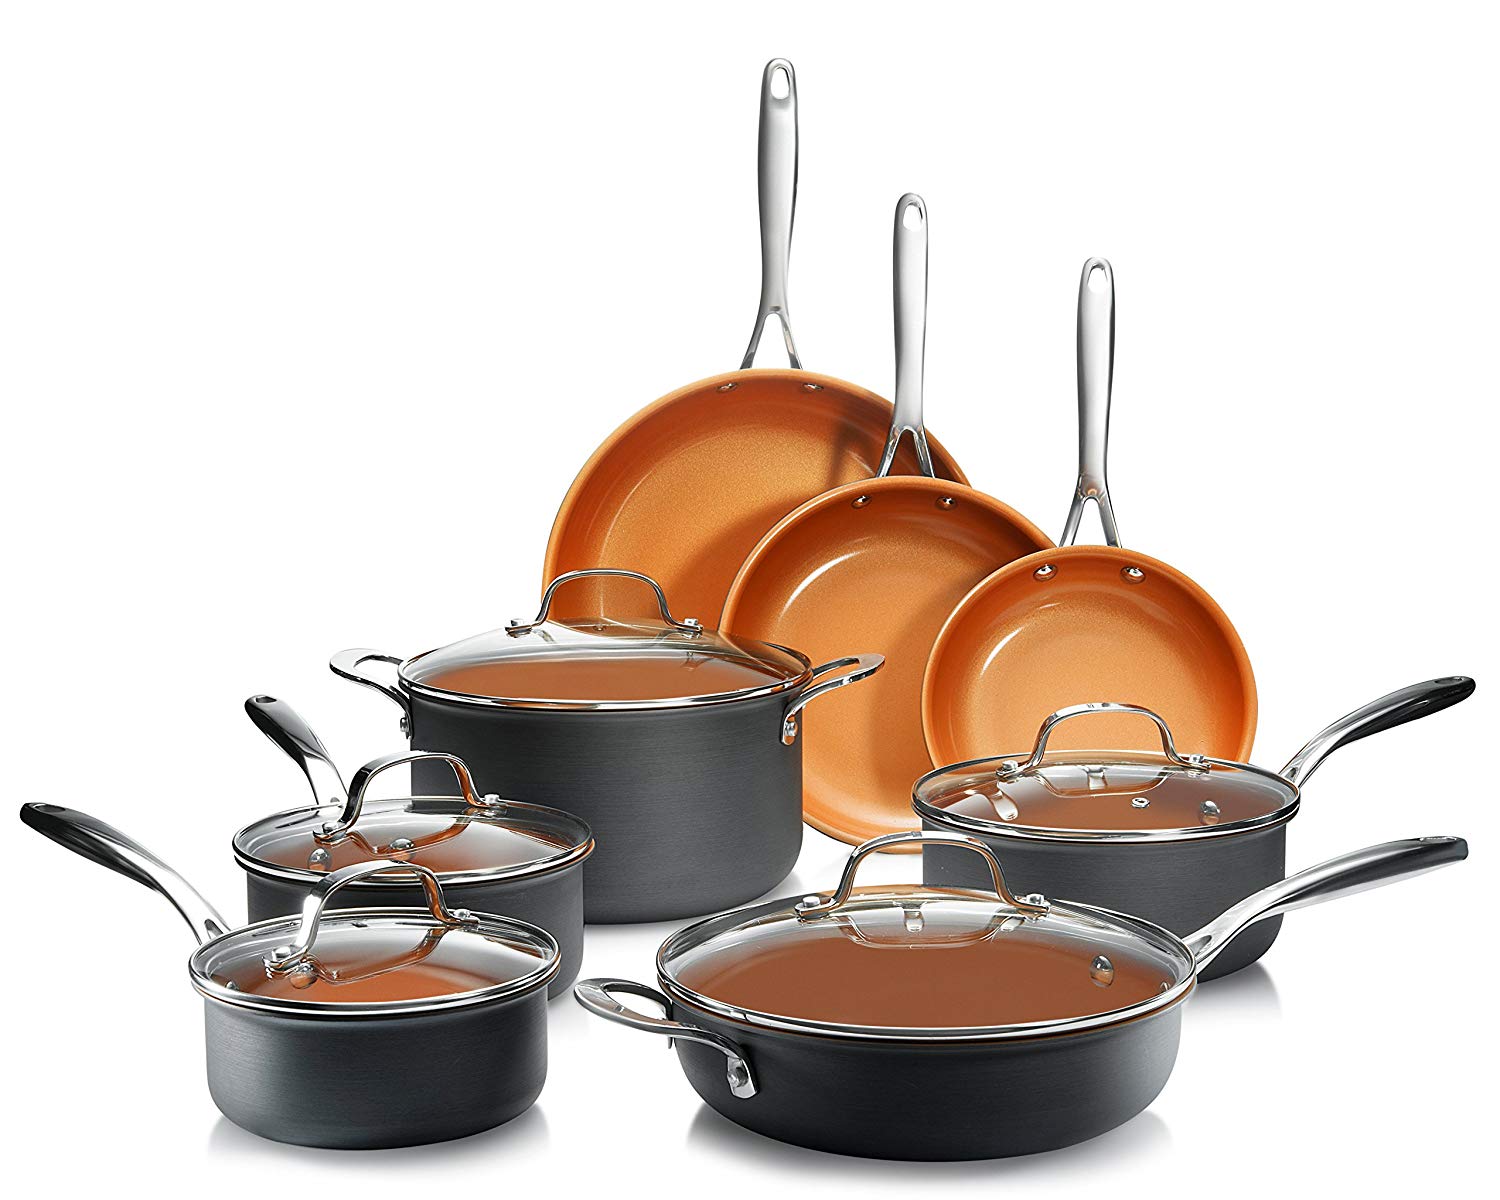 Up To 37% Off on MICHELANGELO Copper Cookware